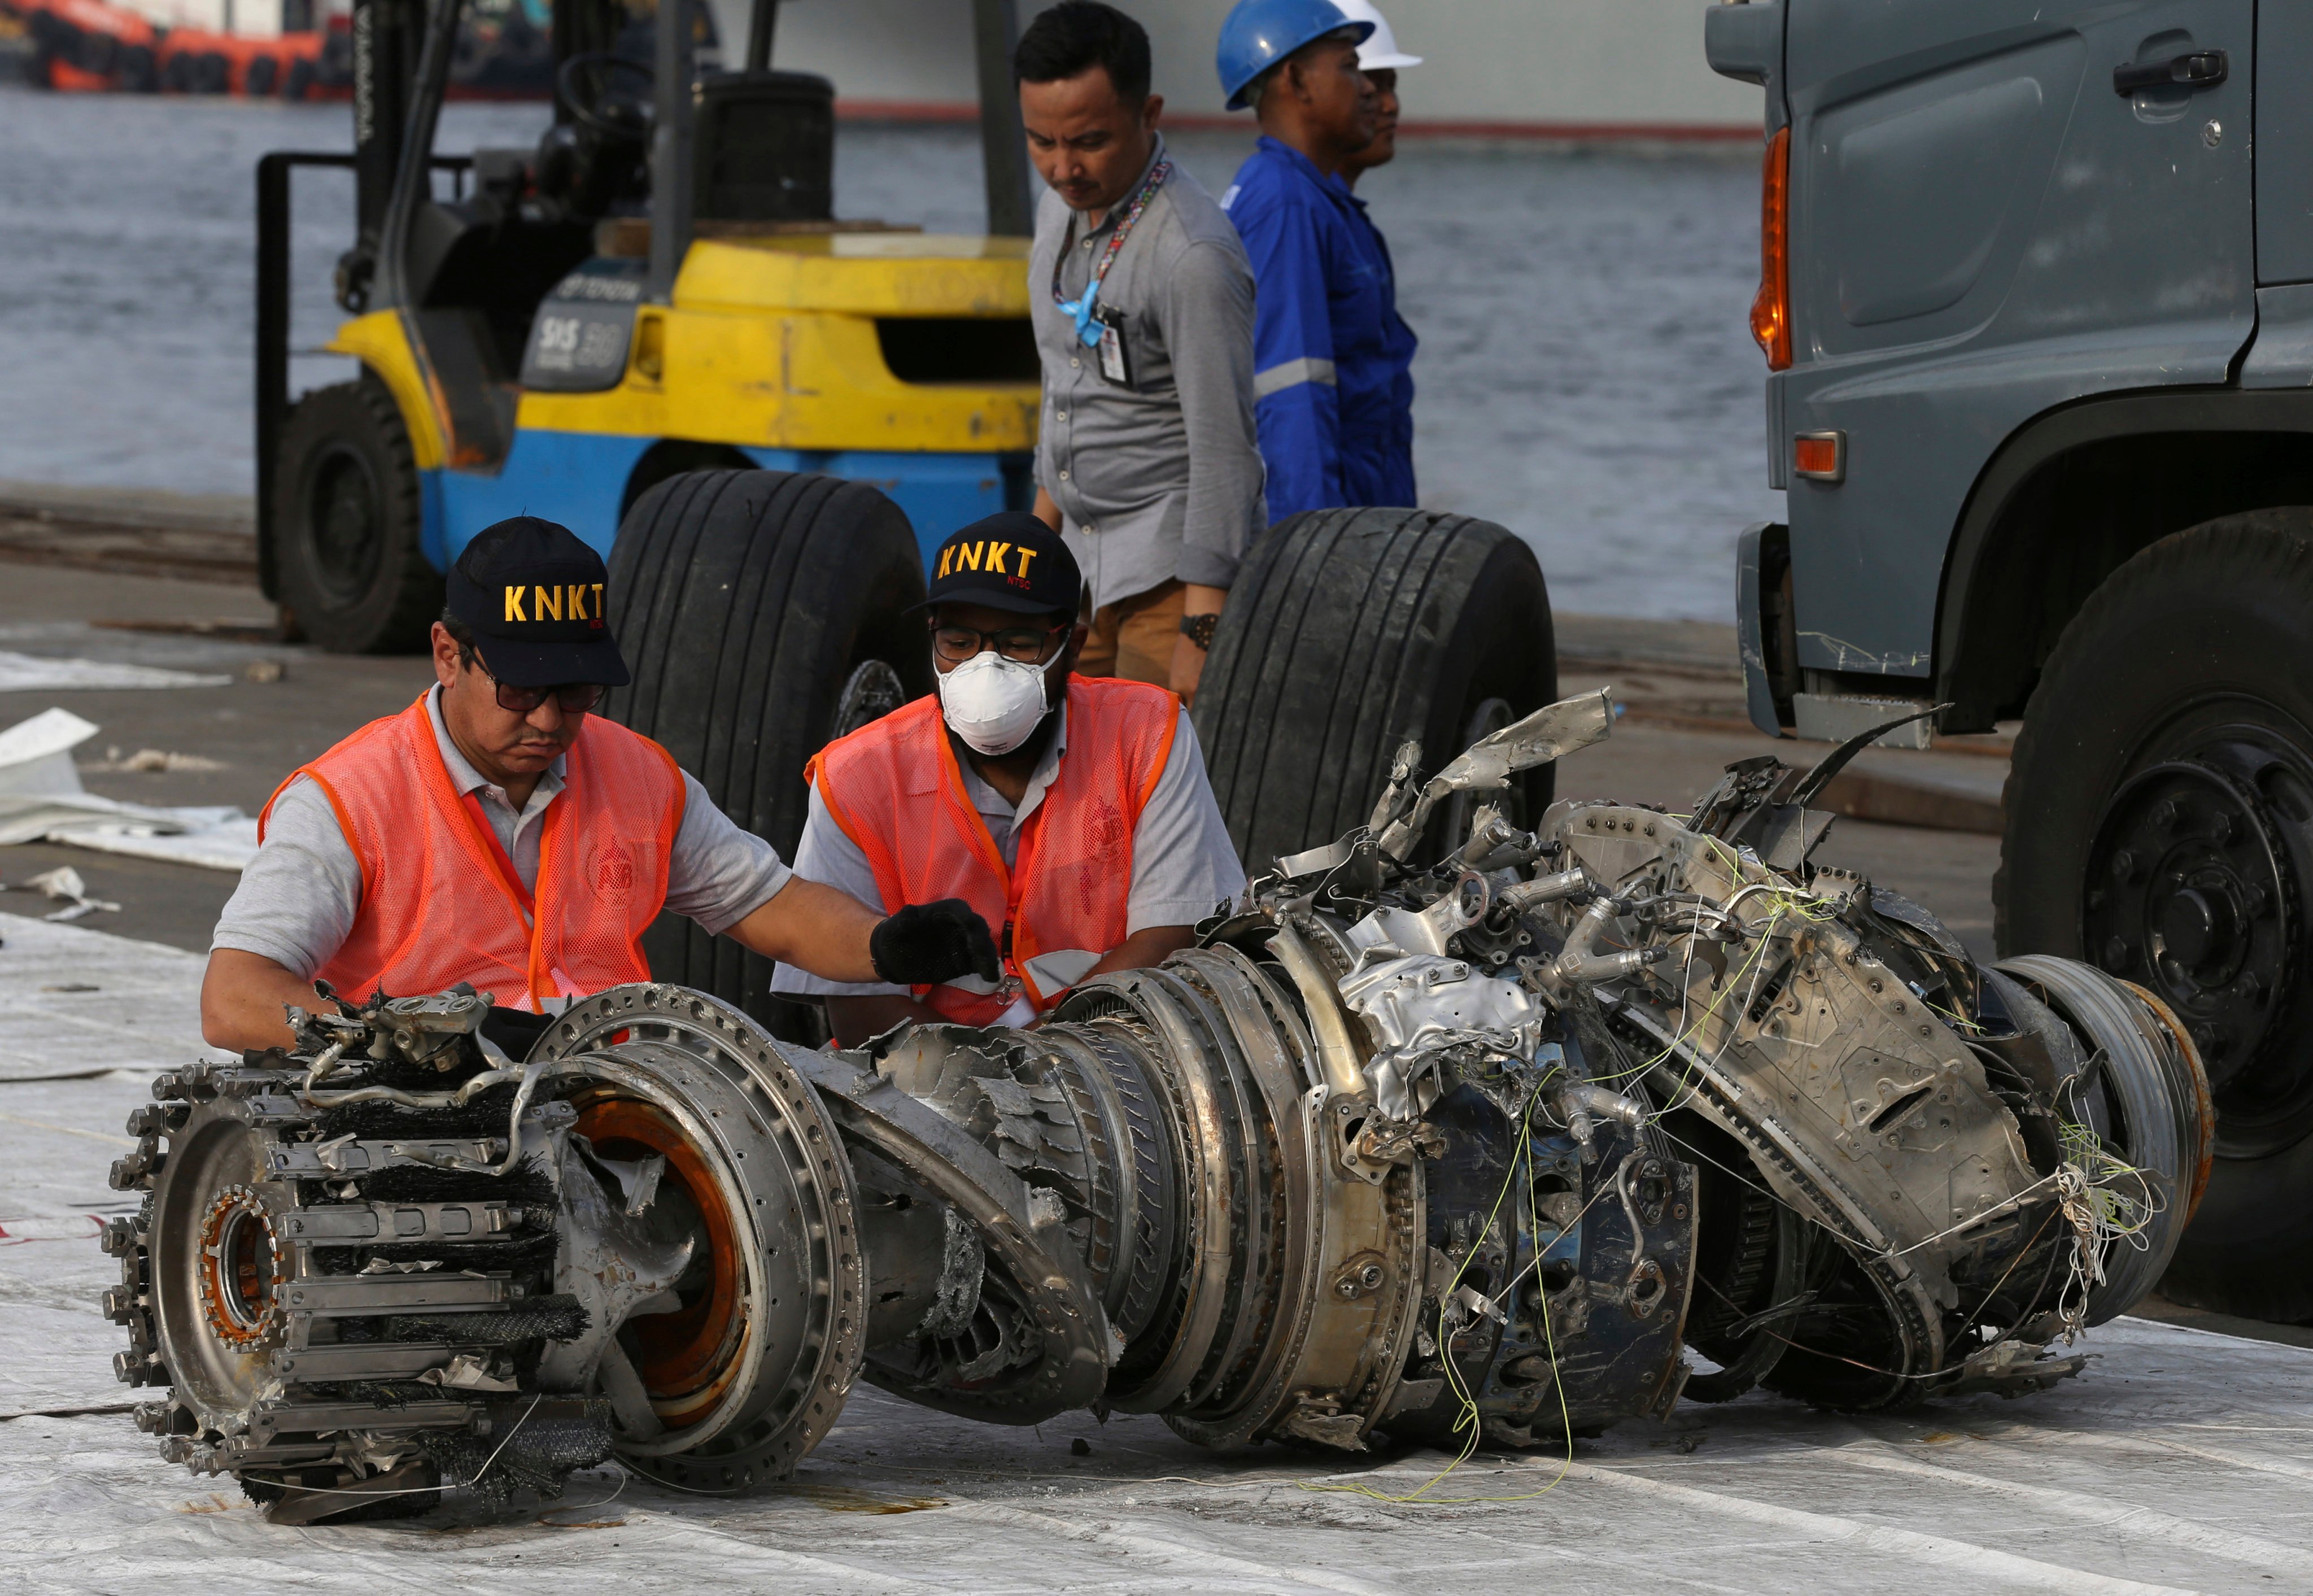 Indonesian officials inspect an engine recovered from the crashed Lion Air jet in 2018. File photo: AP